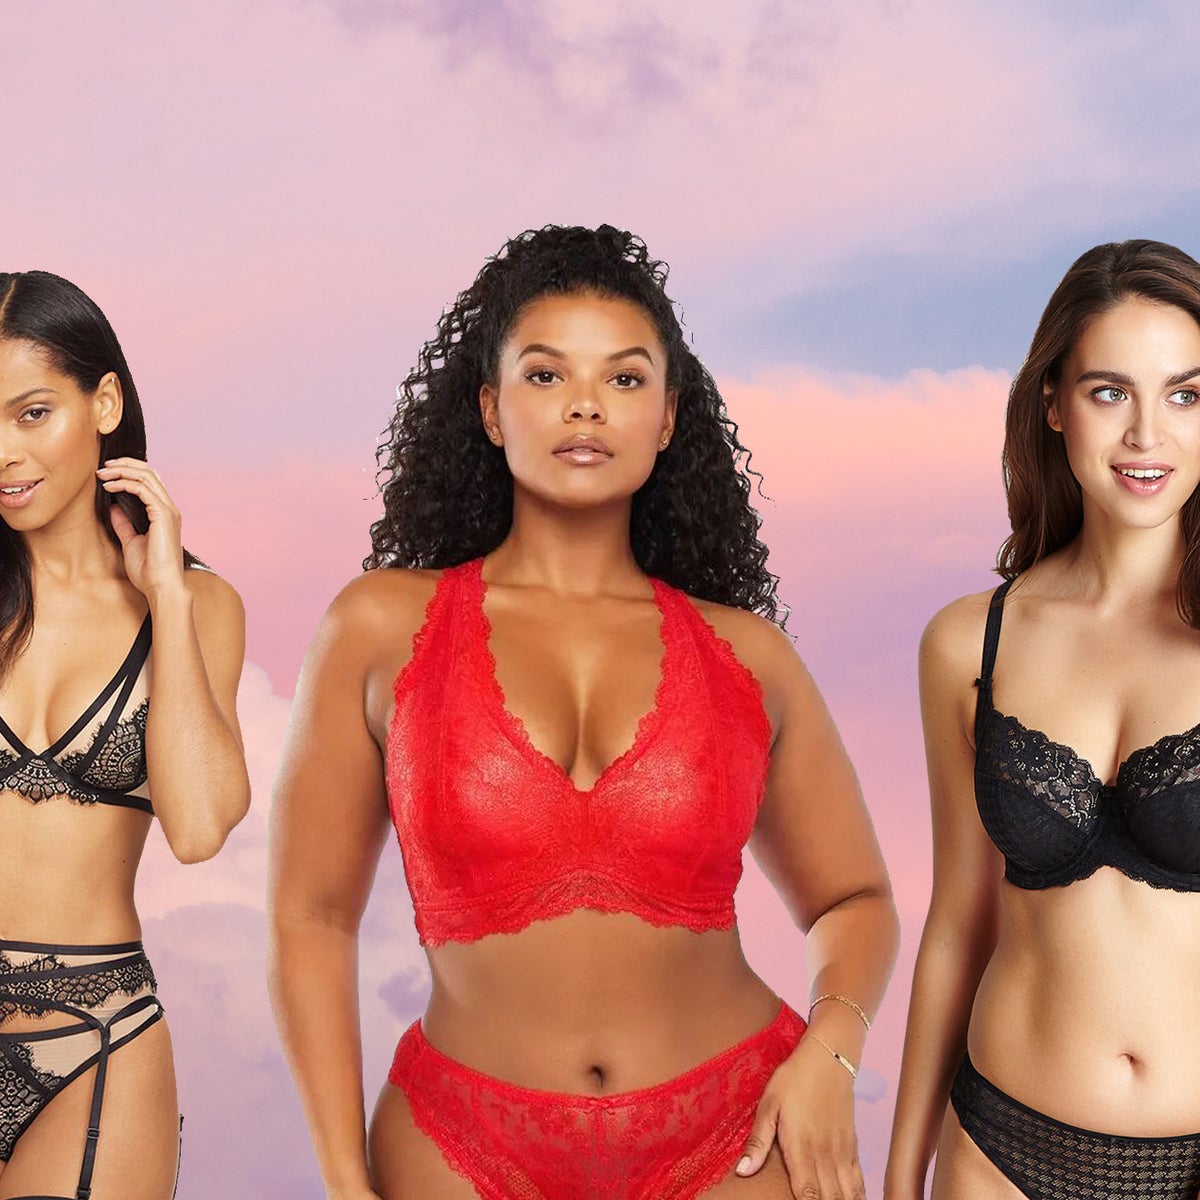 Best bra brands for larger busts that deliver on style, comfort and support